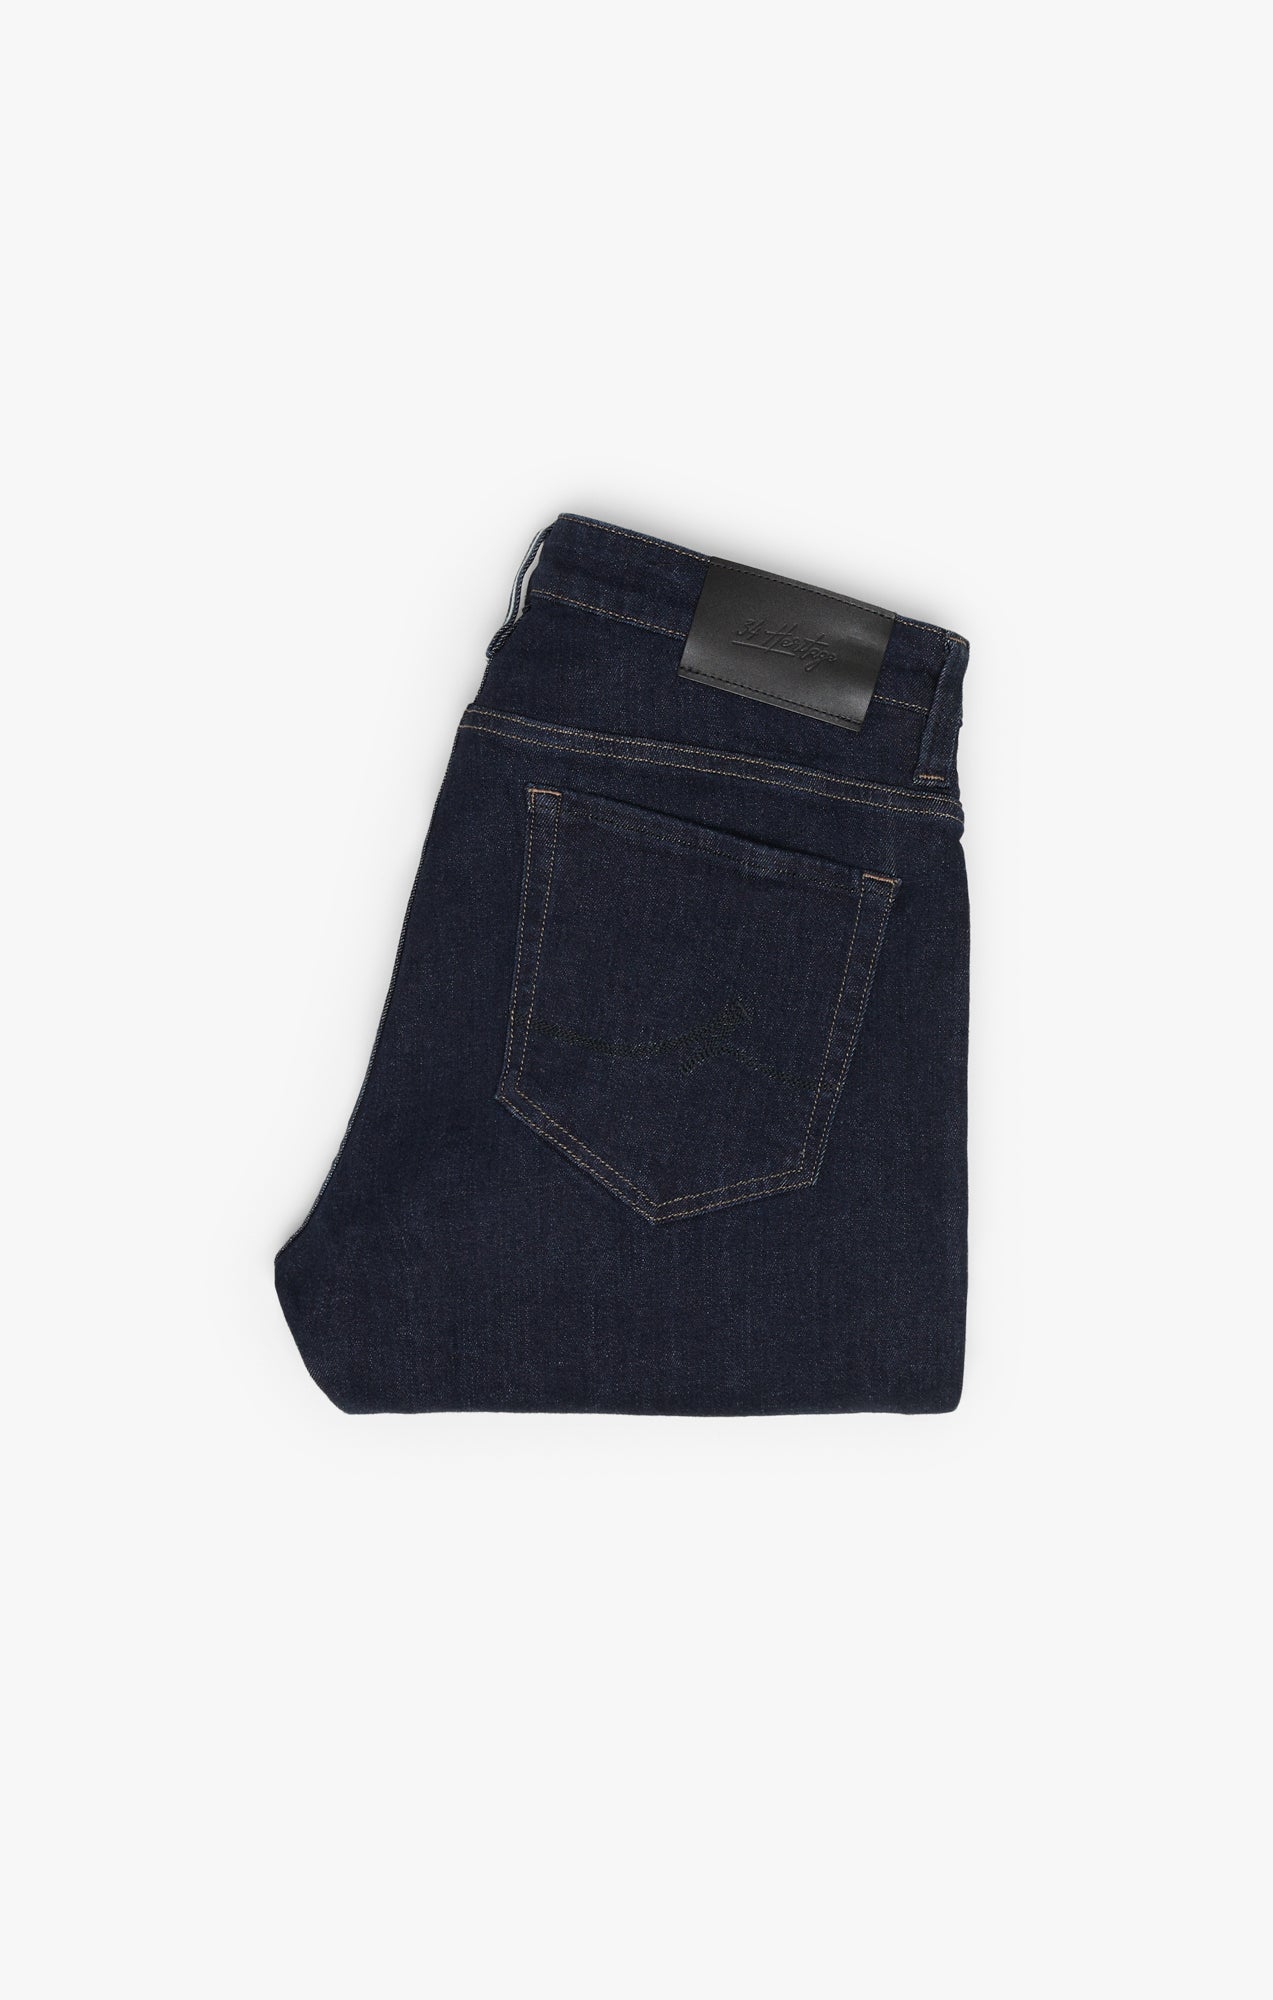 Cool Tapered Leg Jeans In Raw Selvedge Image 9